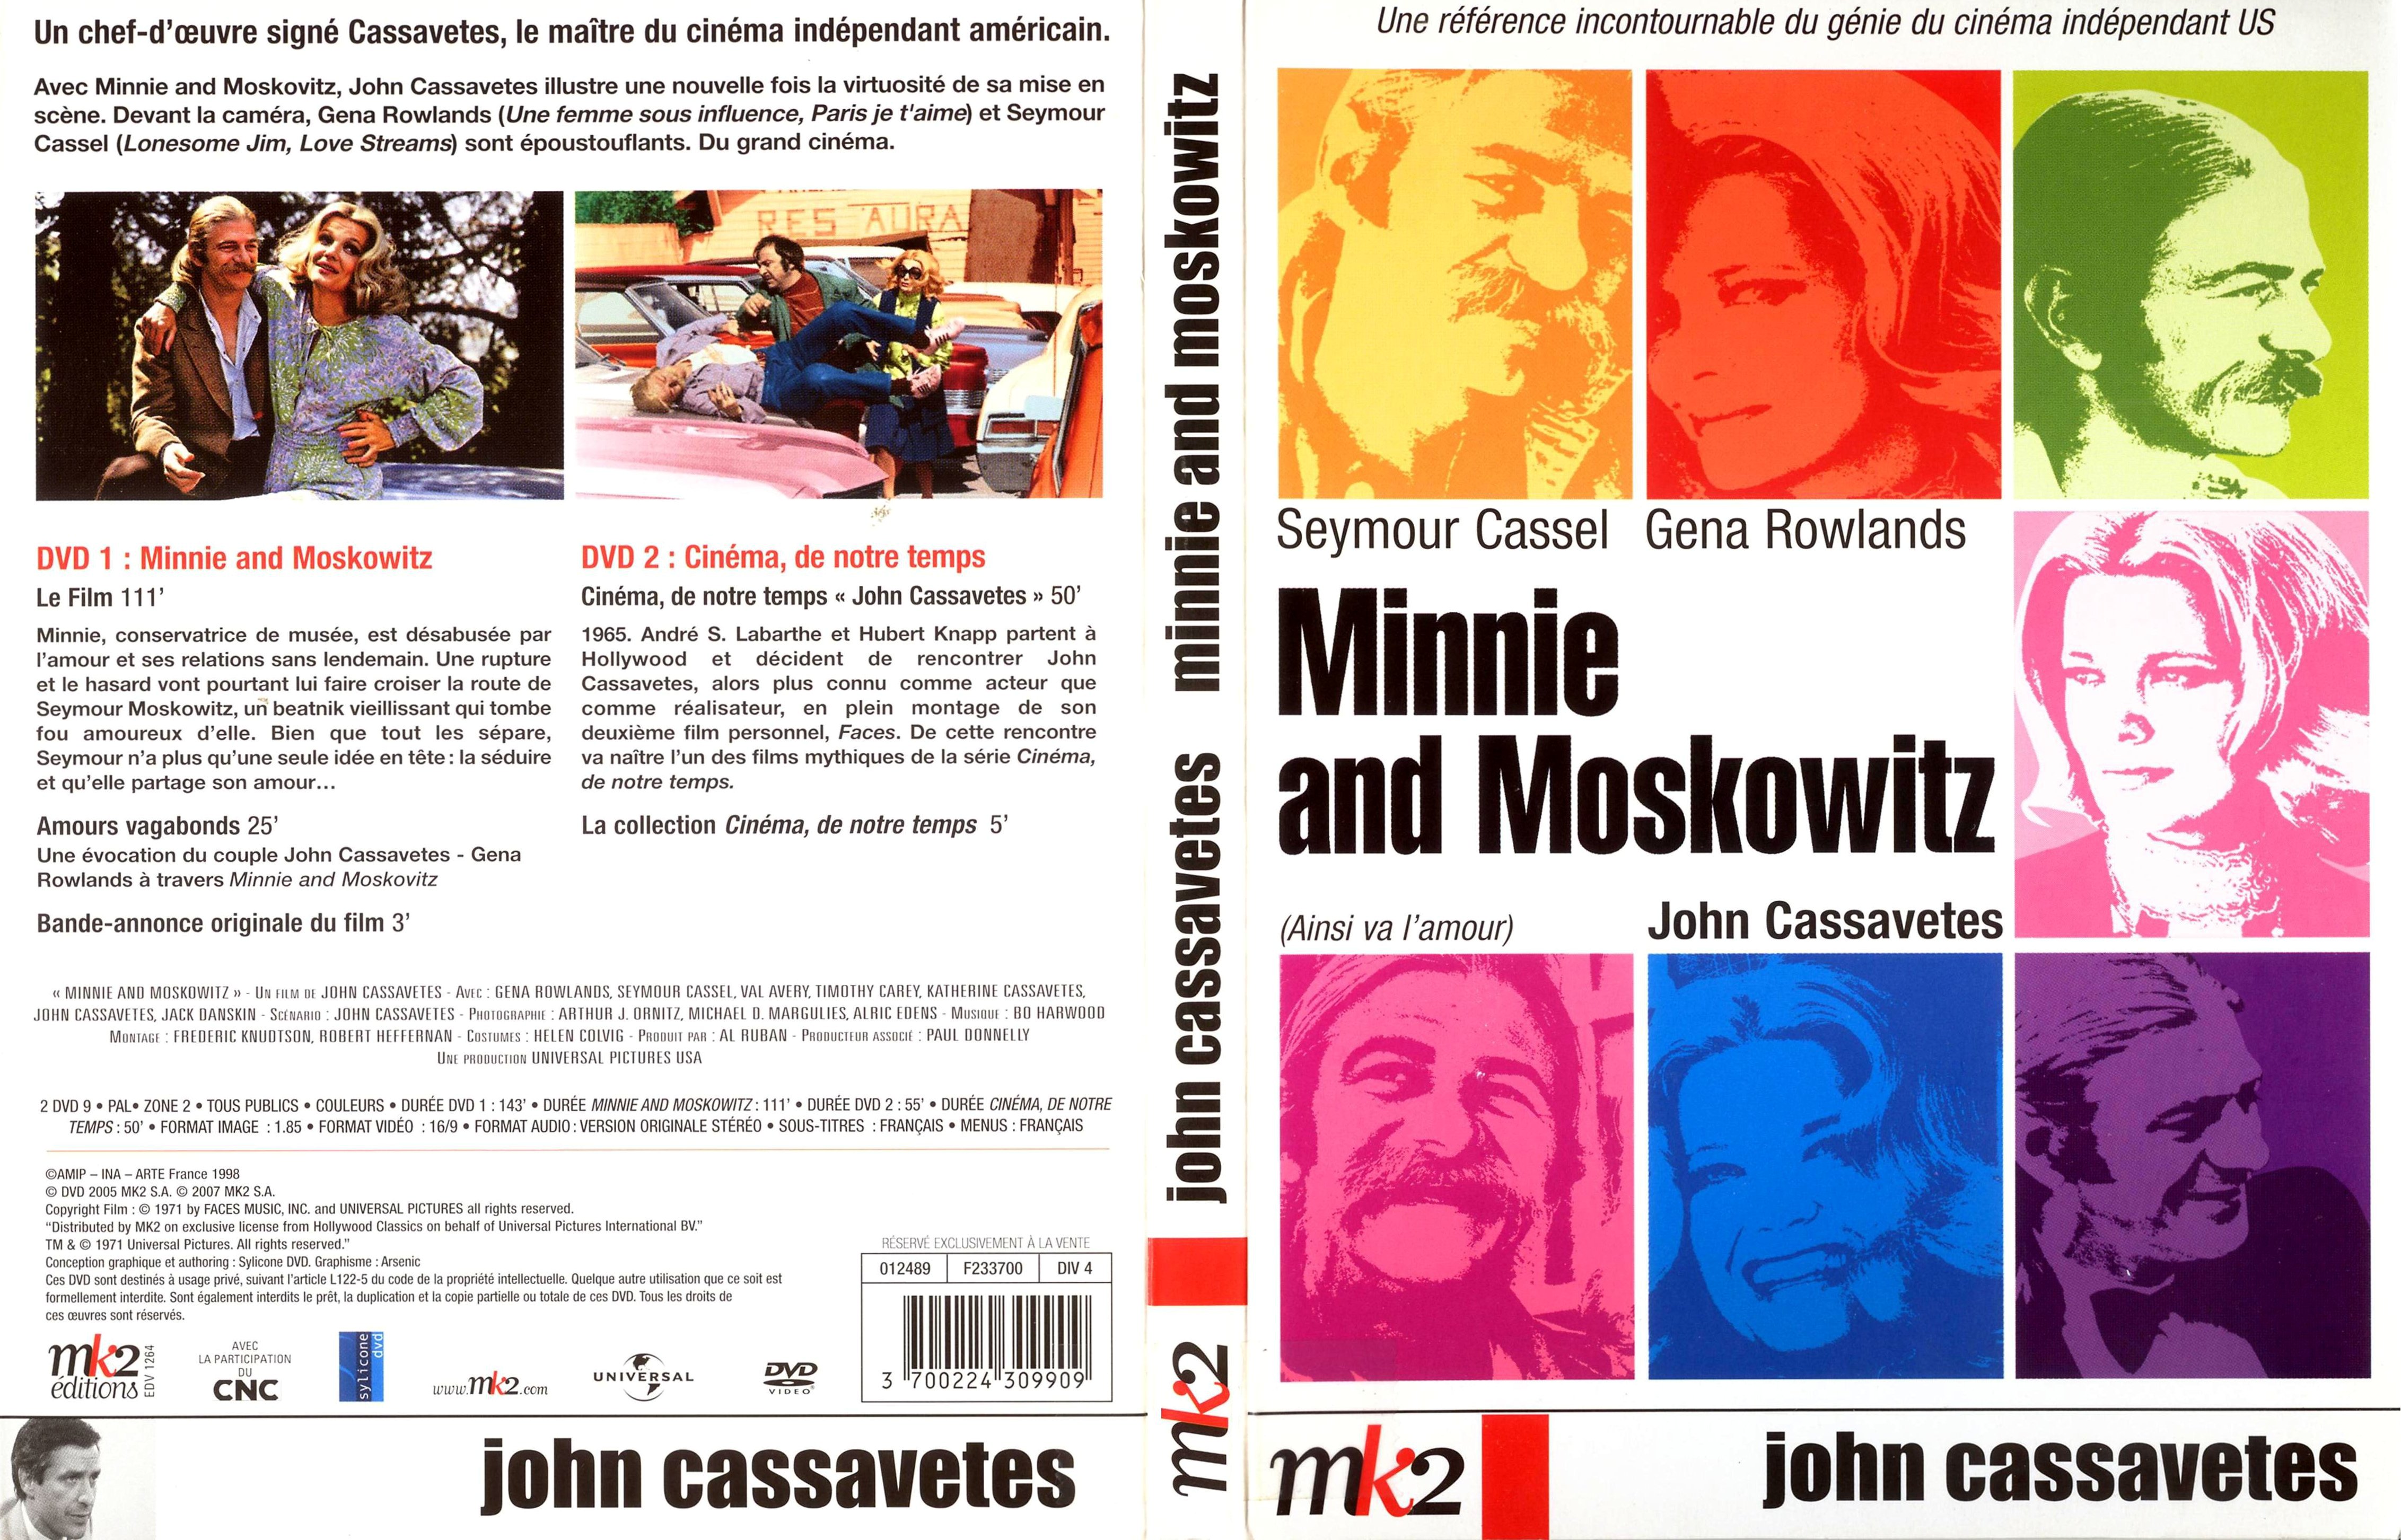 Jaquette DVD Minnie and Moskowitz